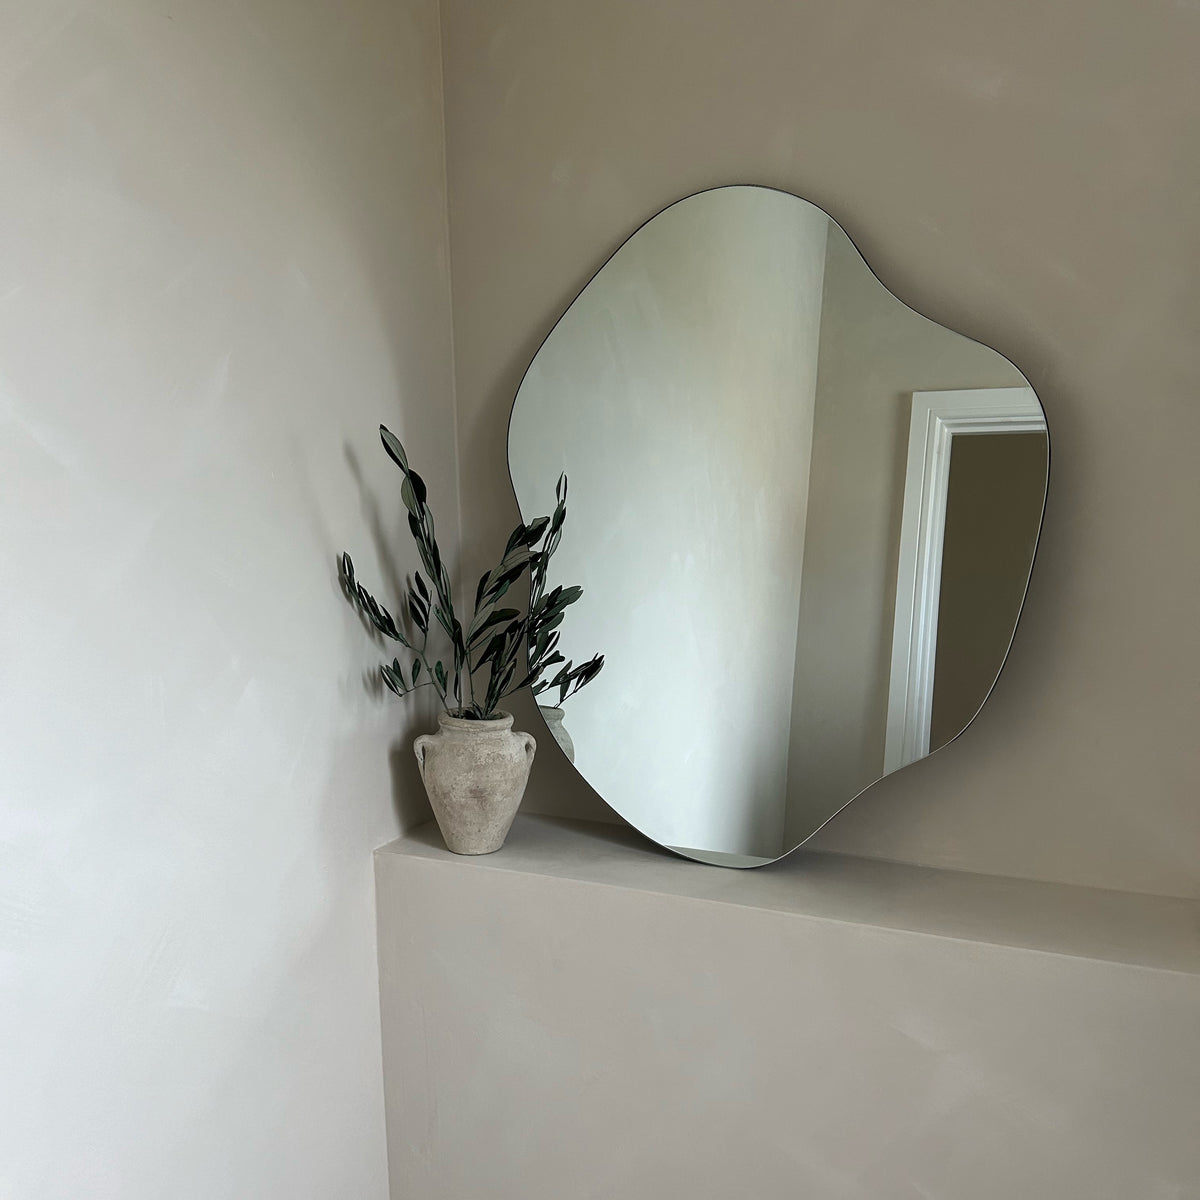 Small Frameless Pond Mirror leaning against the wall